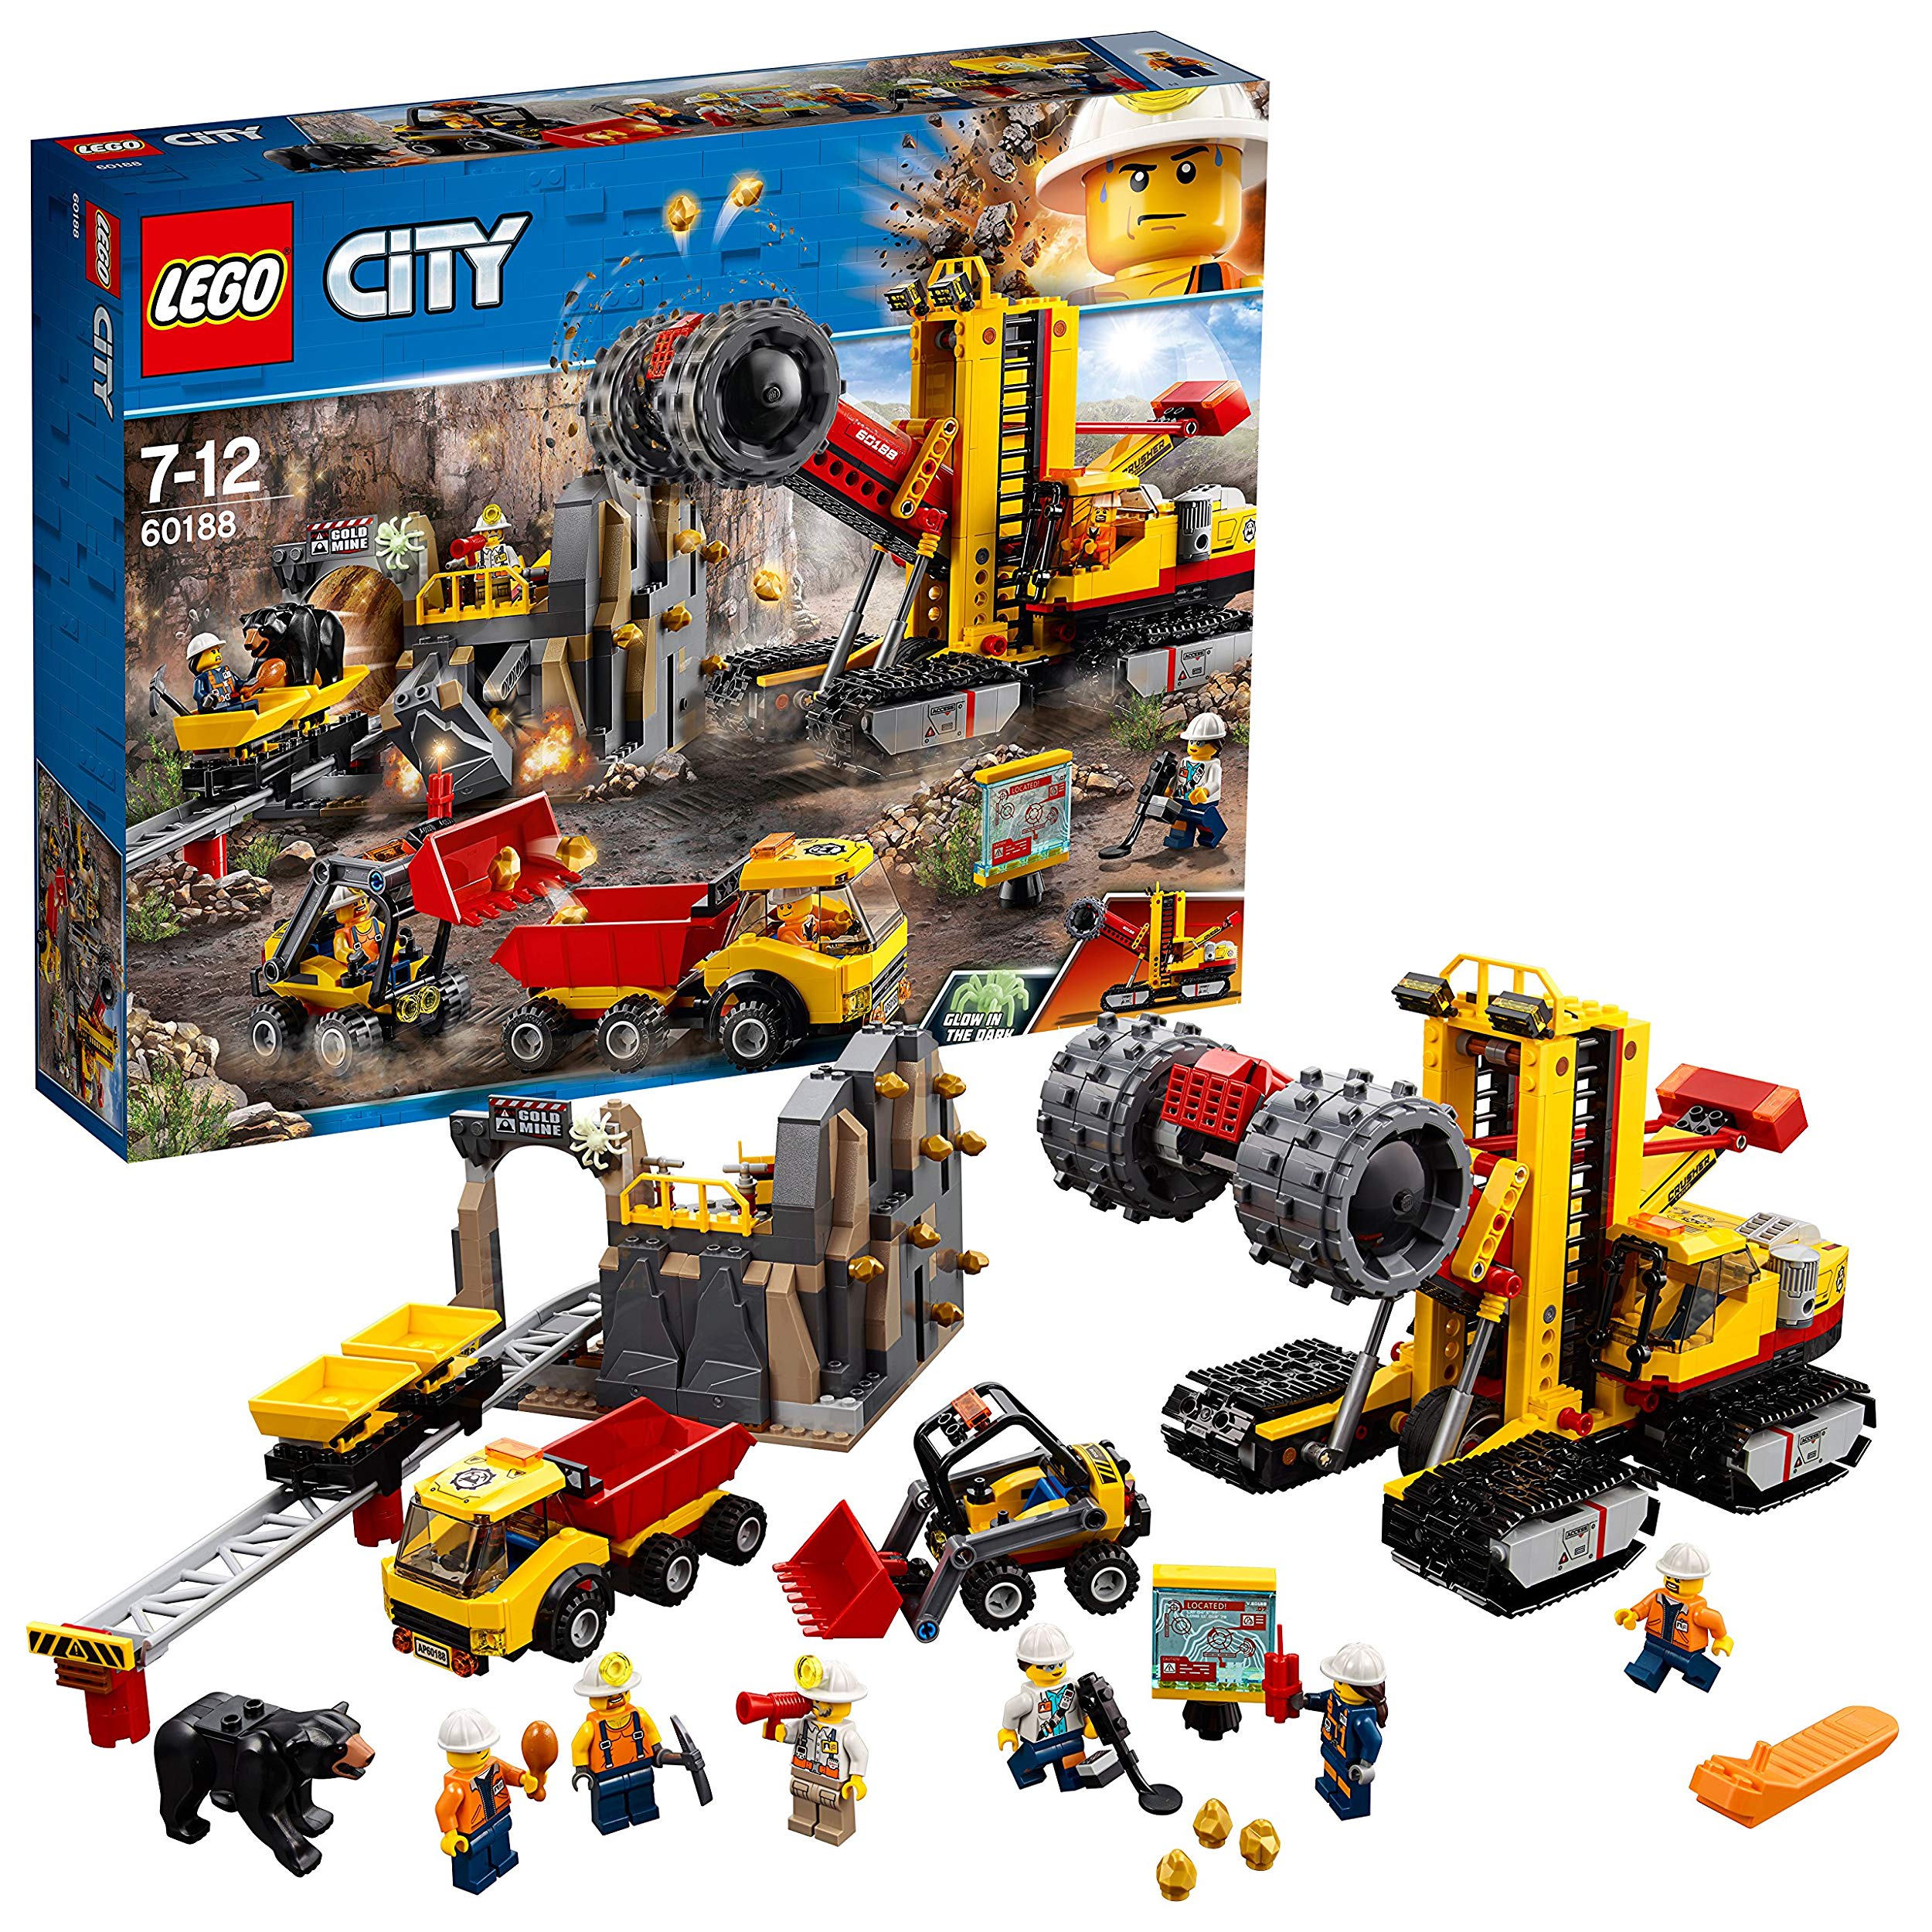 Lego City Toy Coal Mining Professionals Professionals At The Breakdown Faci